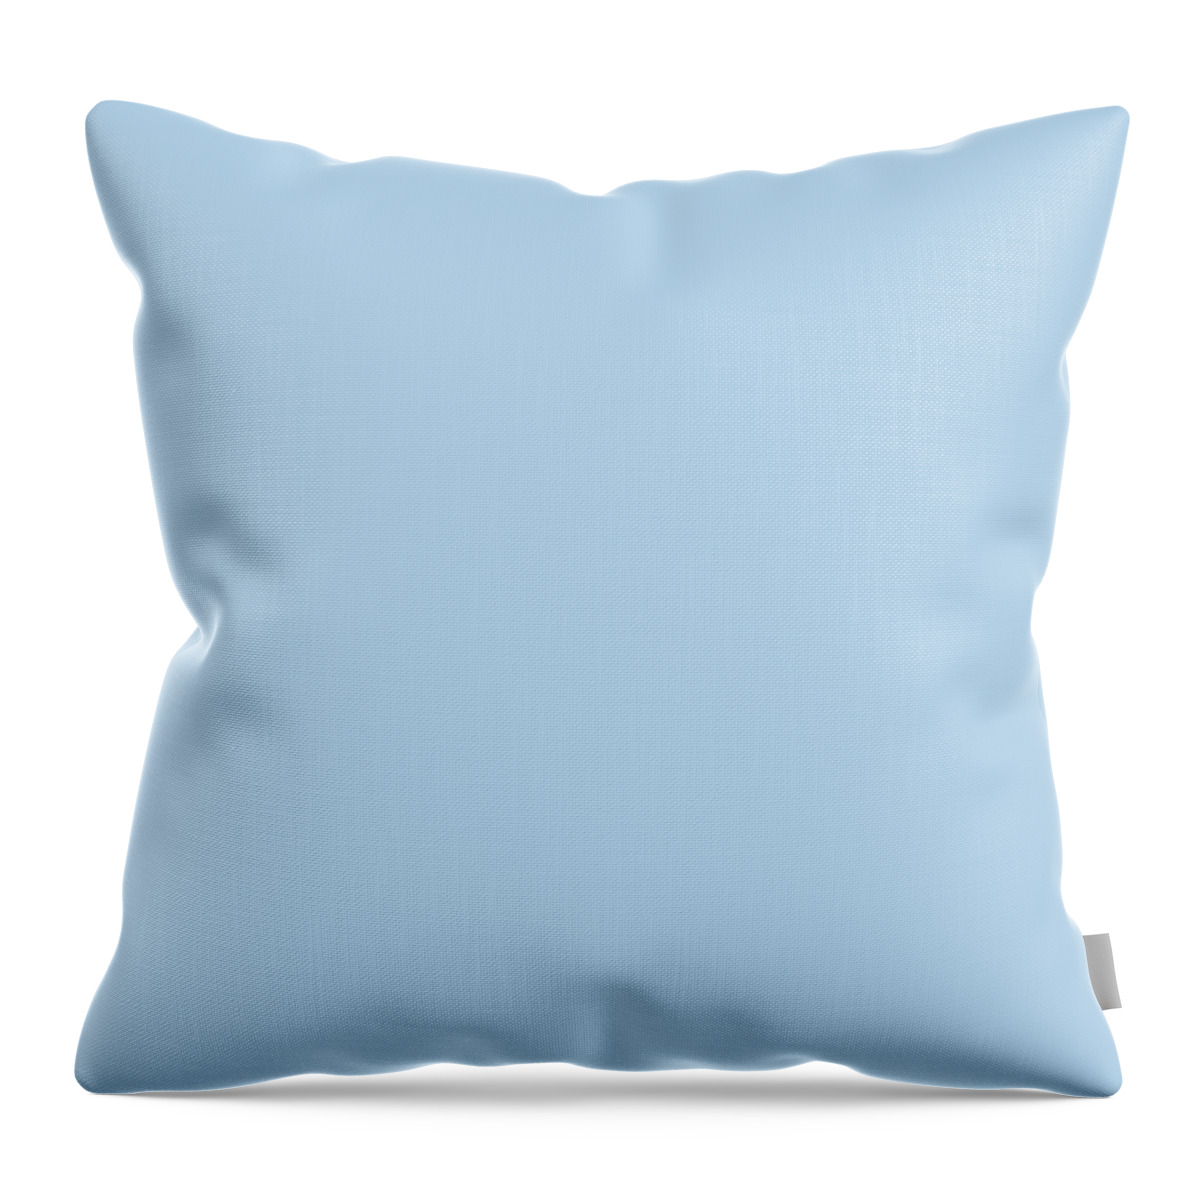 Solid Colors Throw Pillow featuring the digital art Solid Baby Blue by Garaga Designs